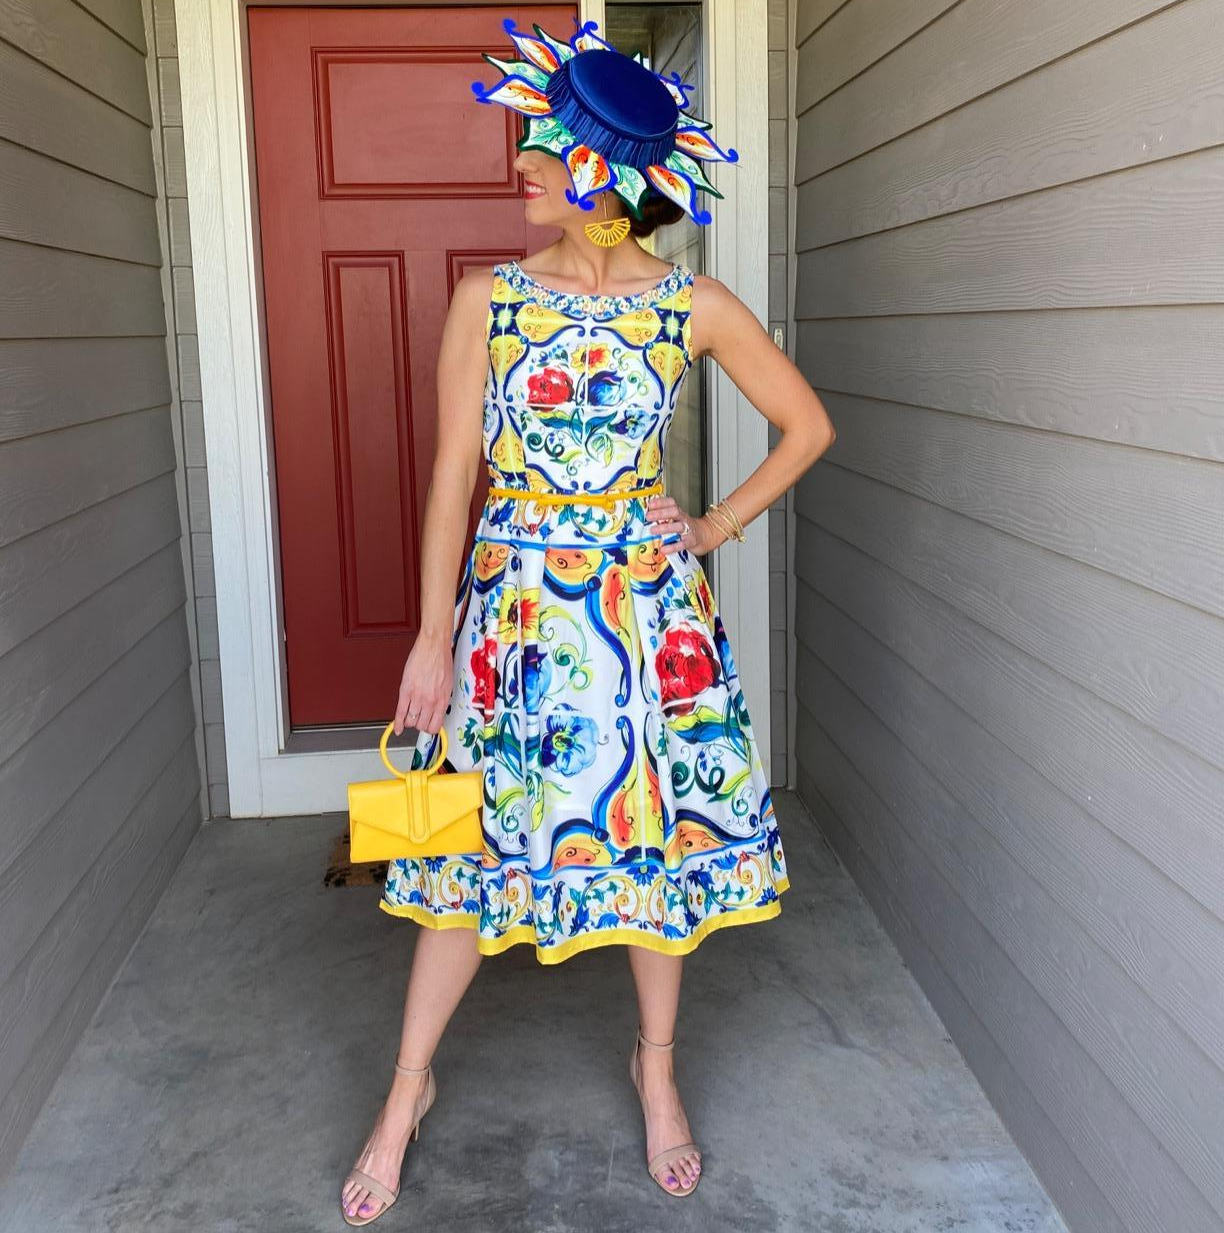 reviewer wears dress with painted flower and swirl design 